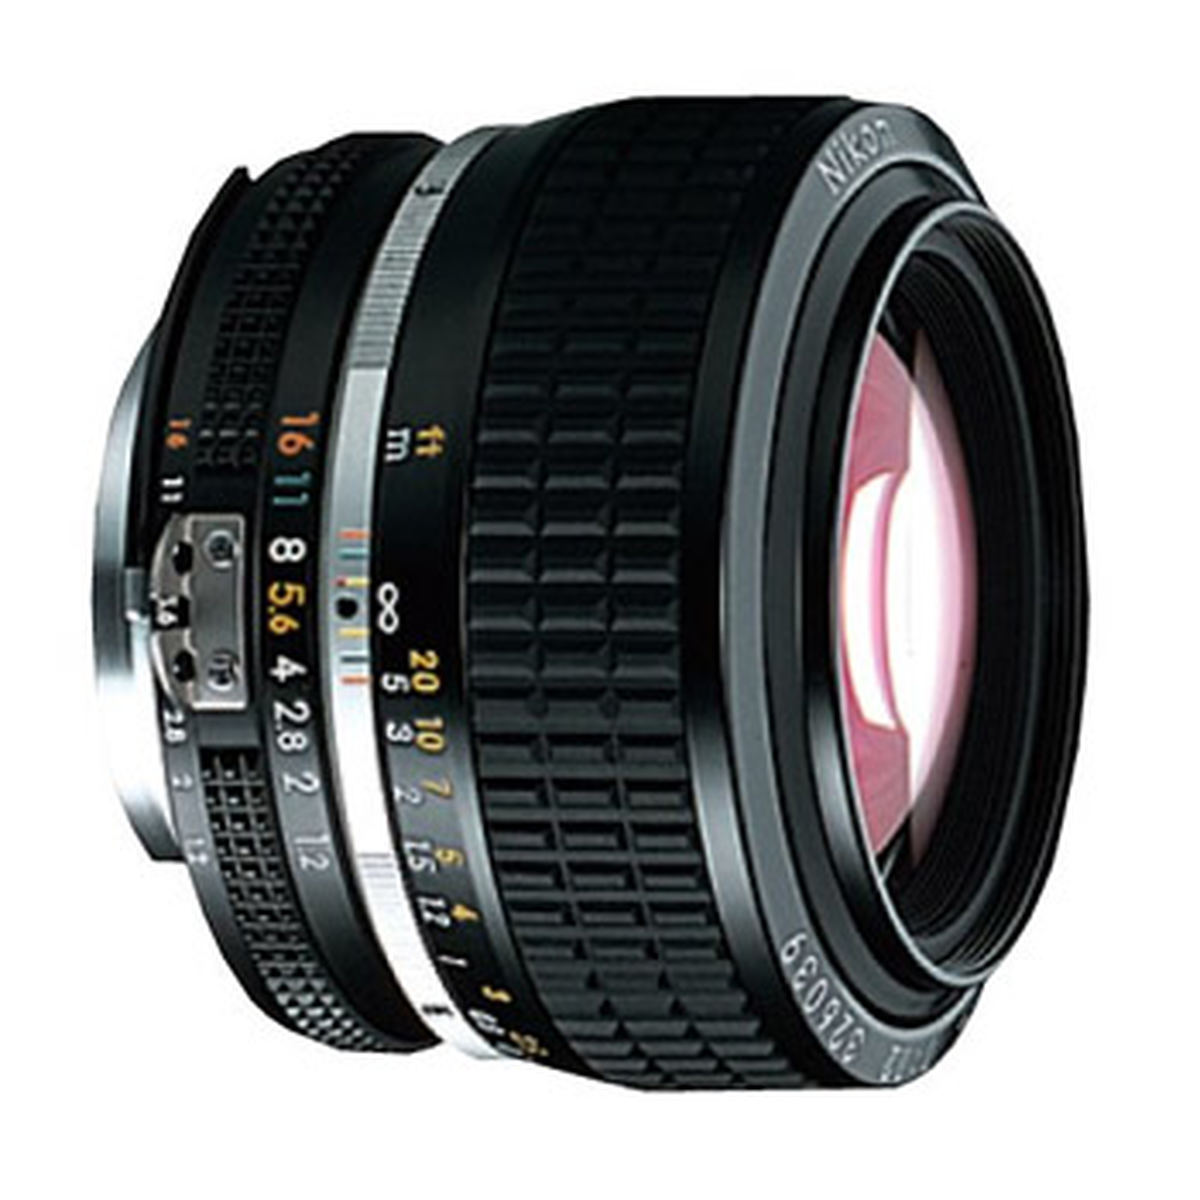 Nikon 50mm f/1.2 AI-s : Specifications and Opinions | JuzaPhoto